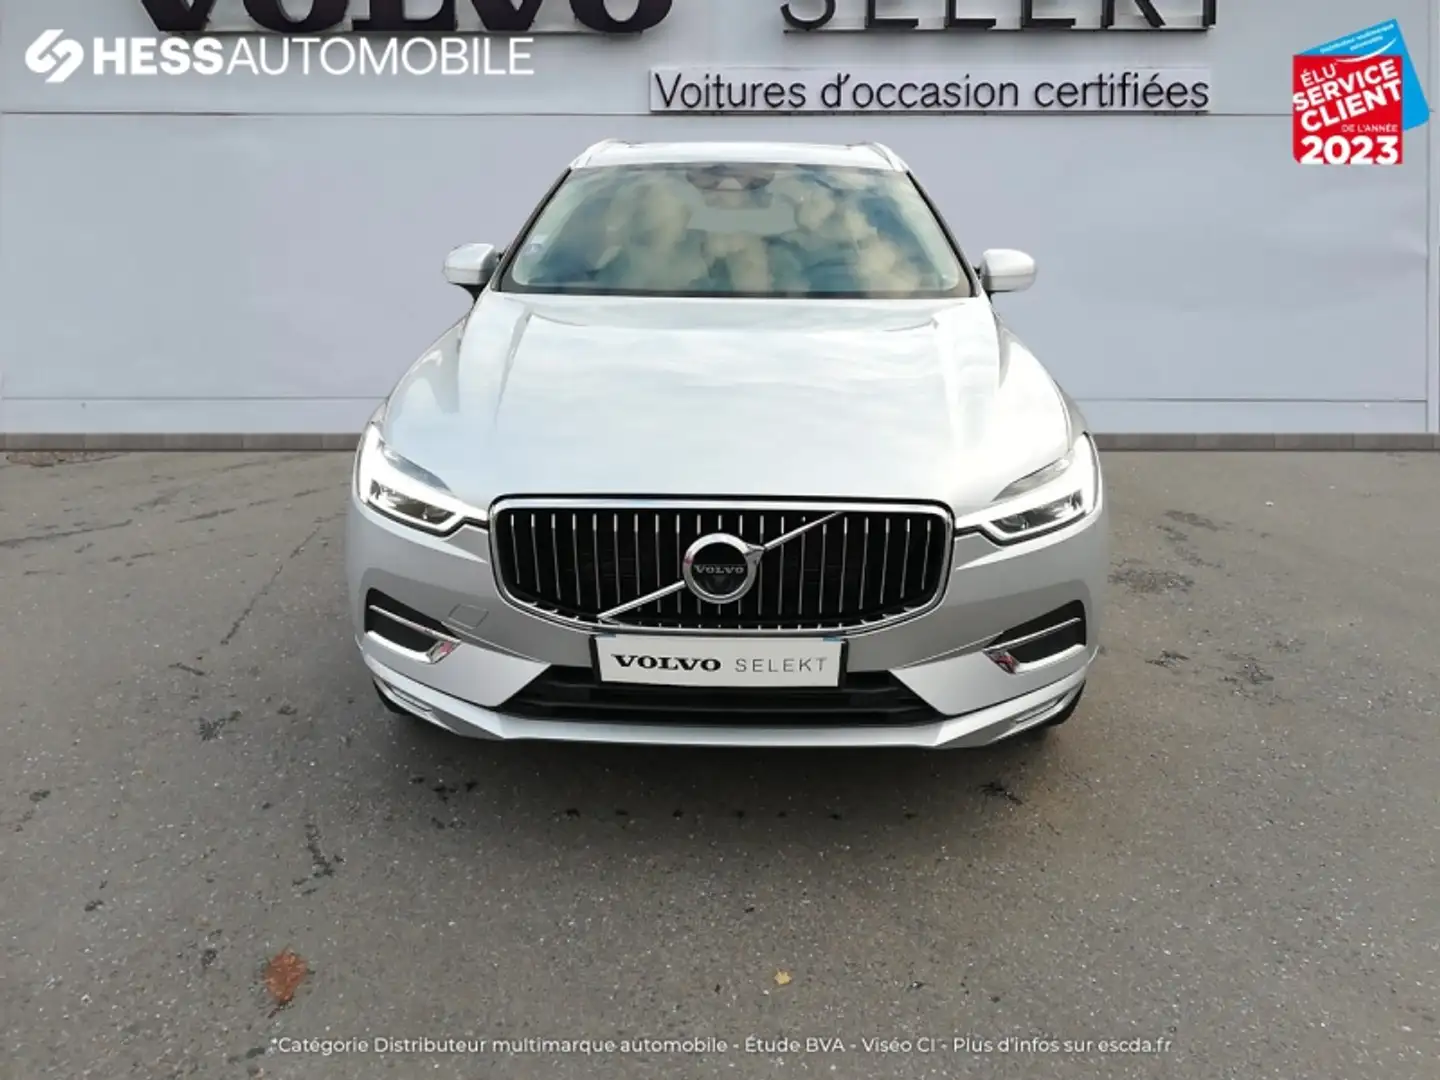 Volvo XC60 T5 AWD 250ch Inscription Luxe Geartronic - 2